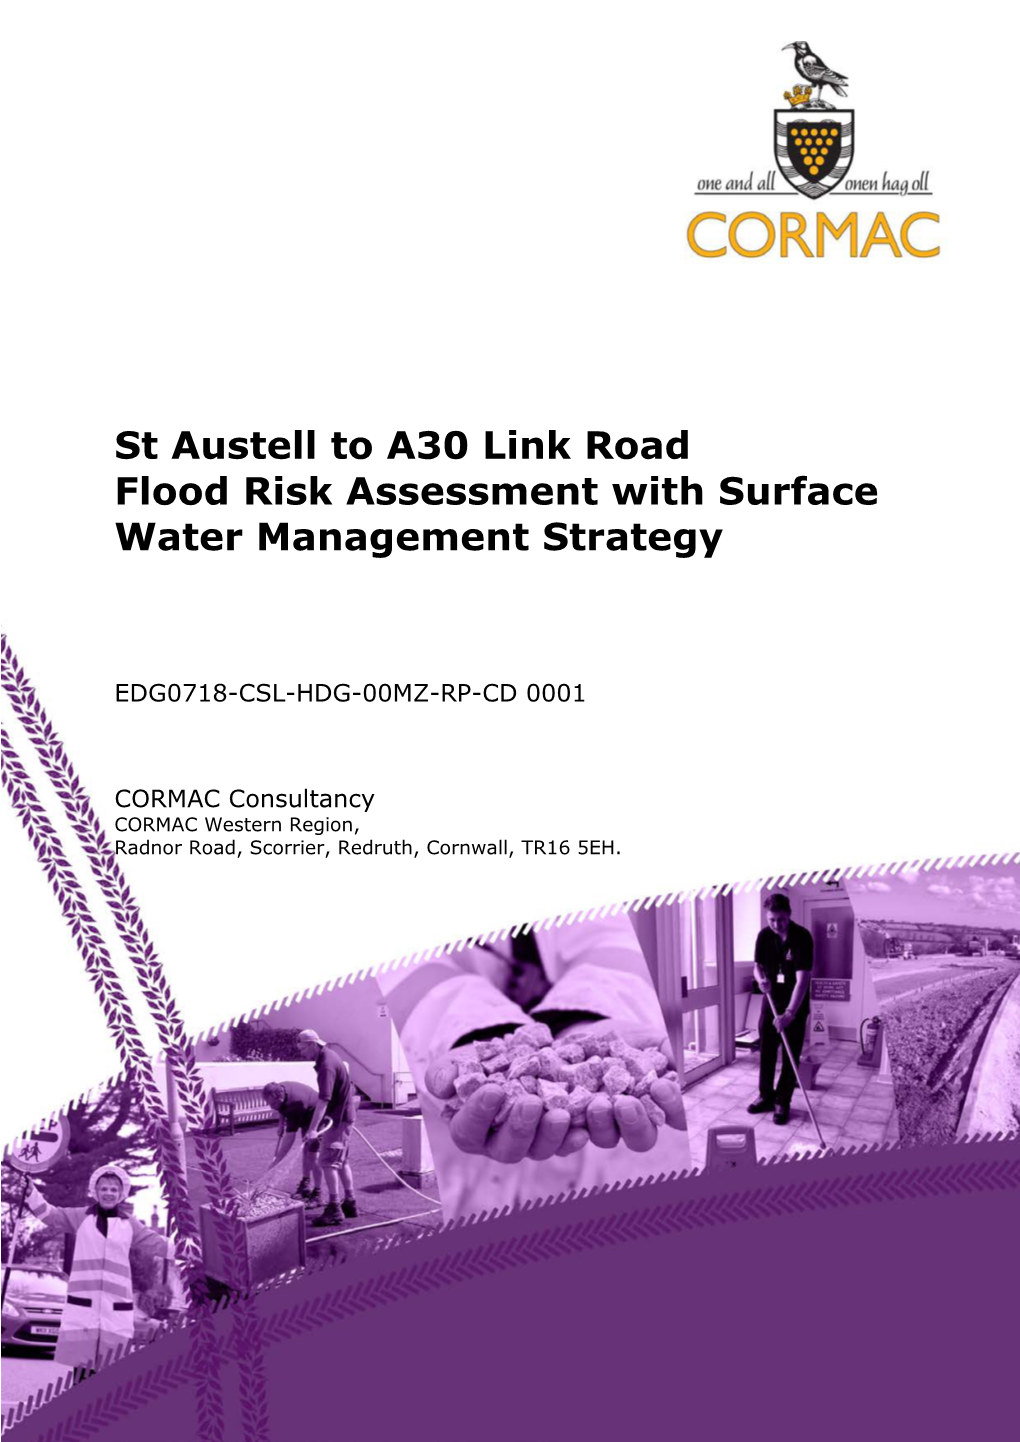 St Austell to A30 Link Road Flood Risk Assessment with Surface Water Management Strategy